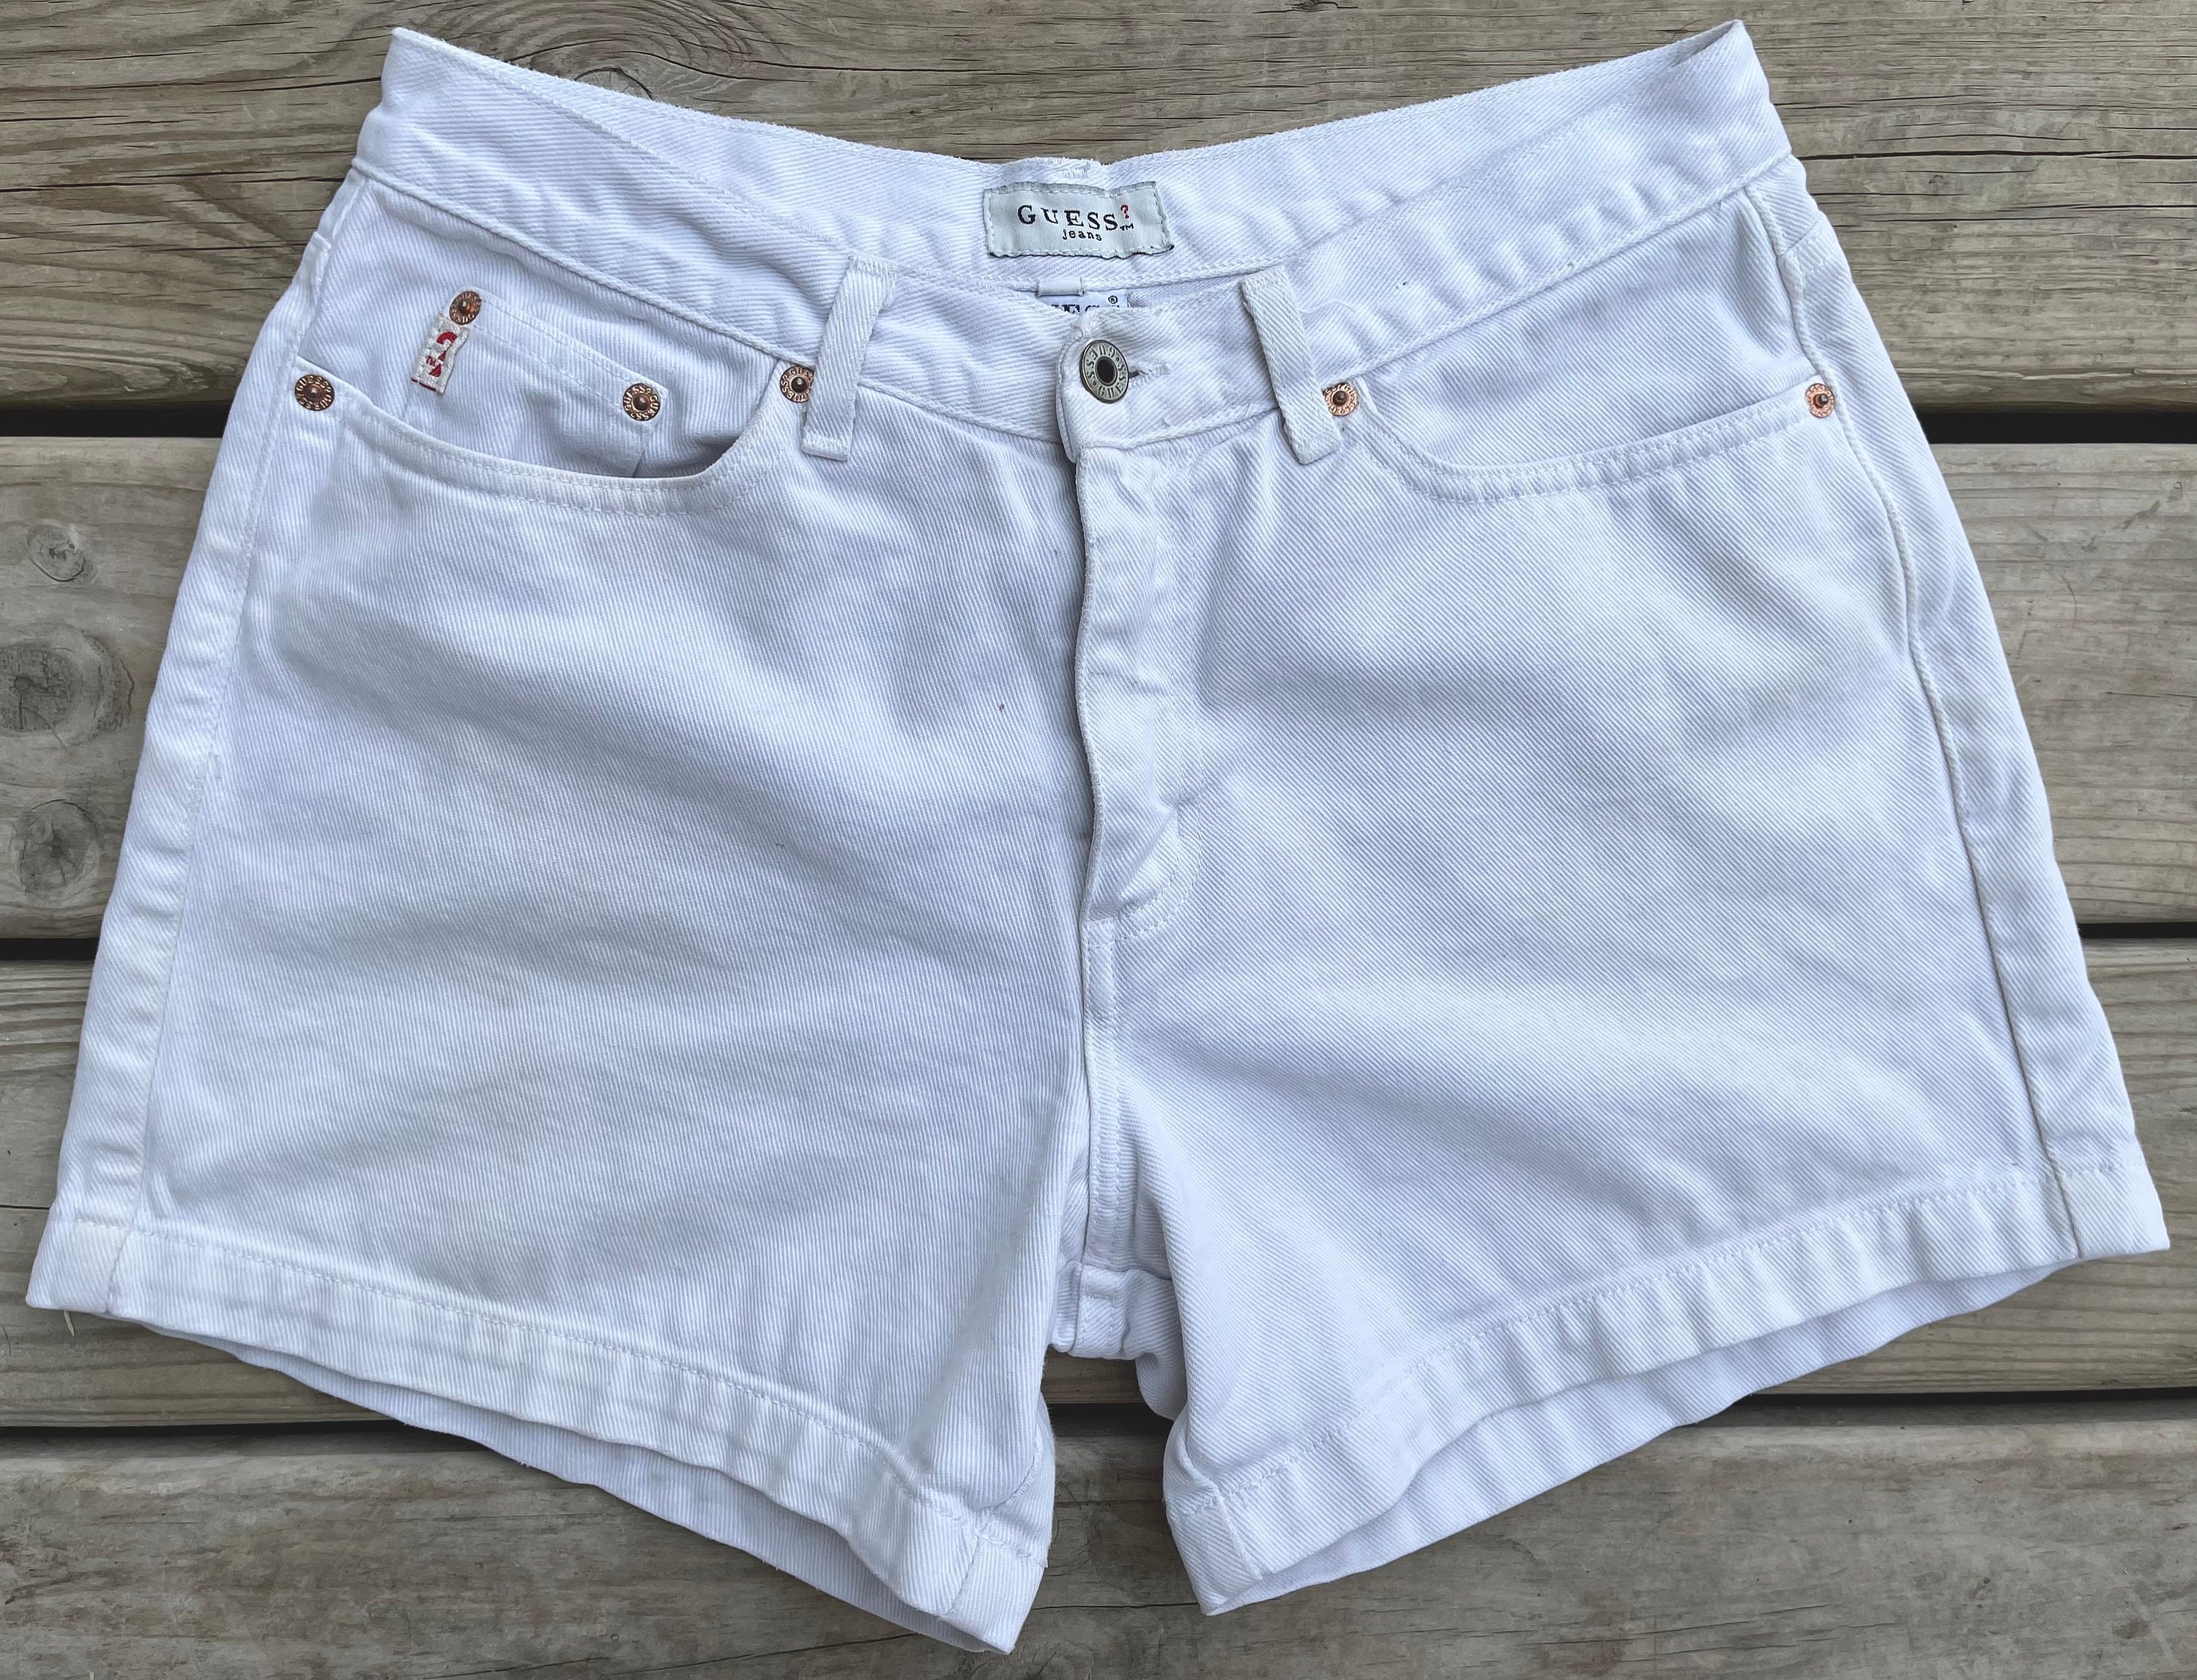 Vintage White Guess Shorts | Etsy